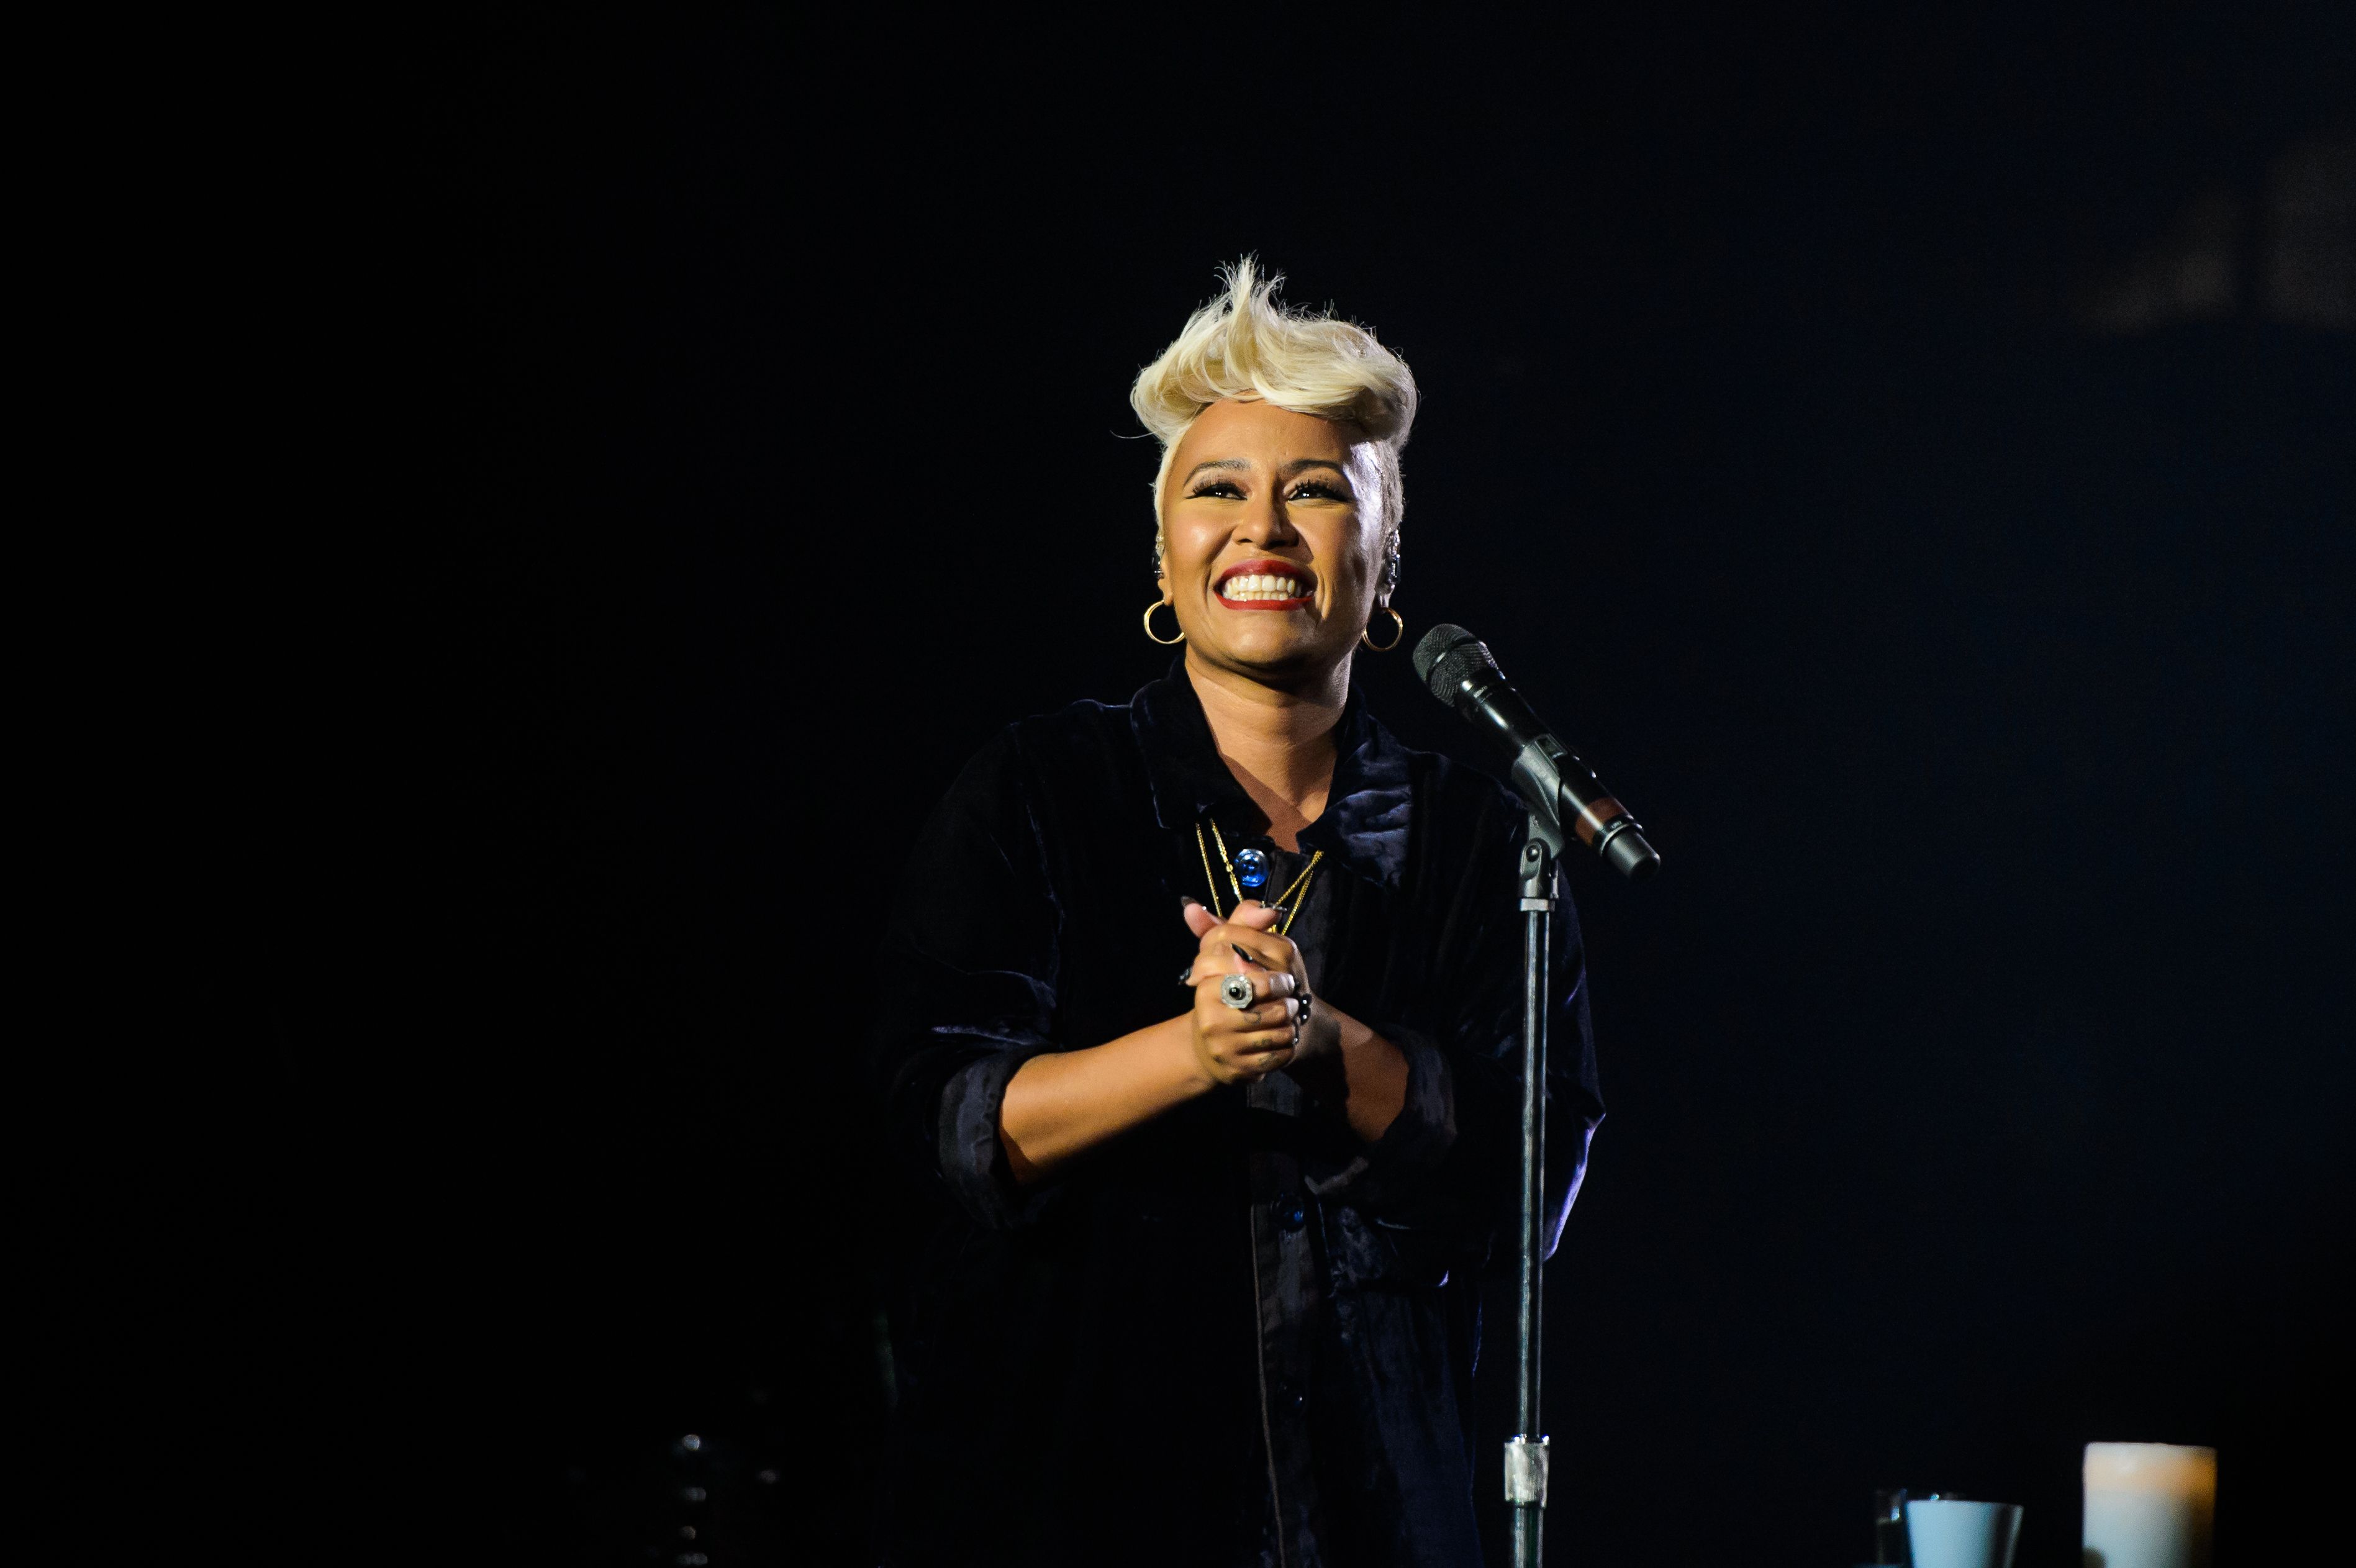 Emeli Sandé is back with new single 'Hurts' and it's EPIC - listen to it  here